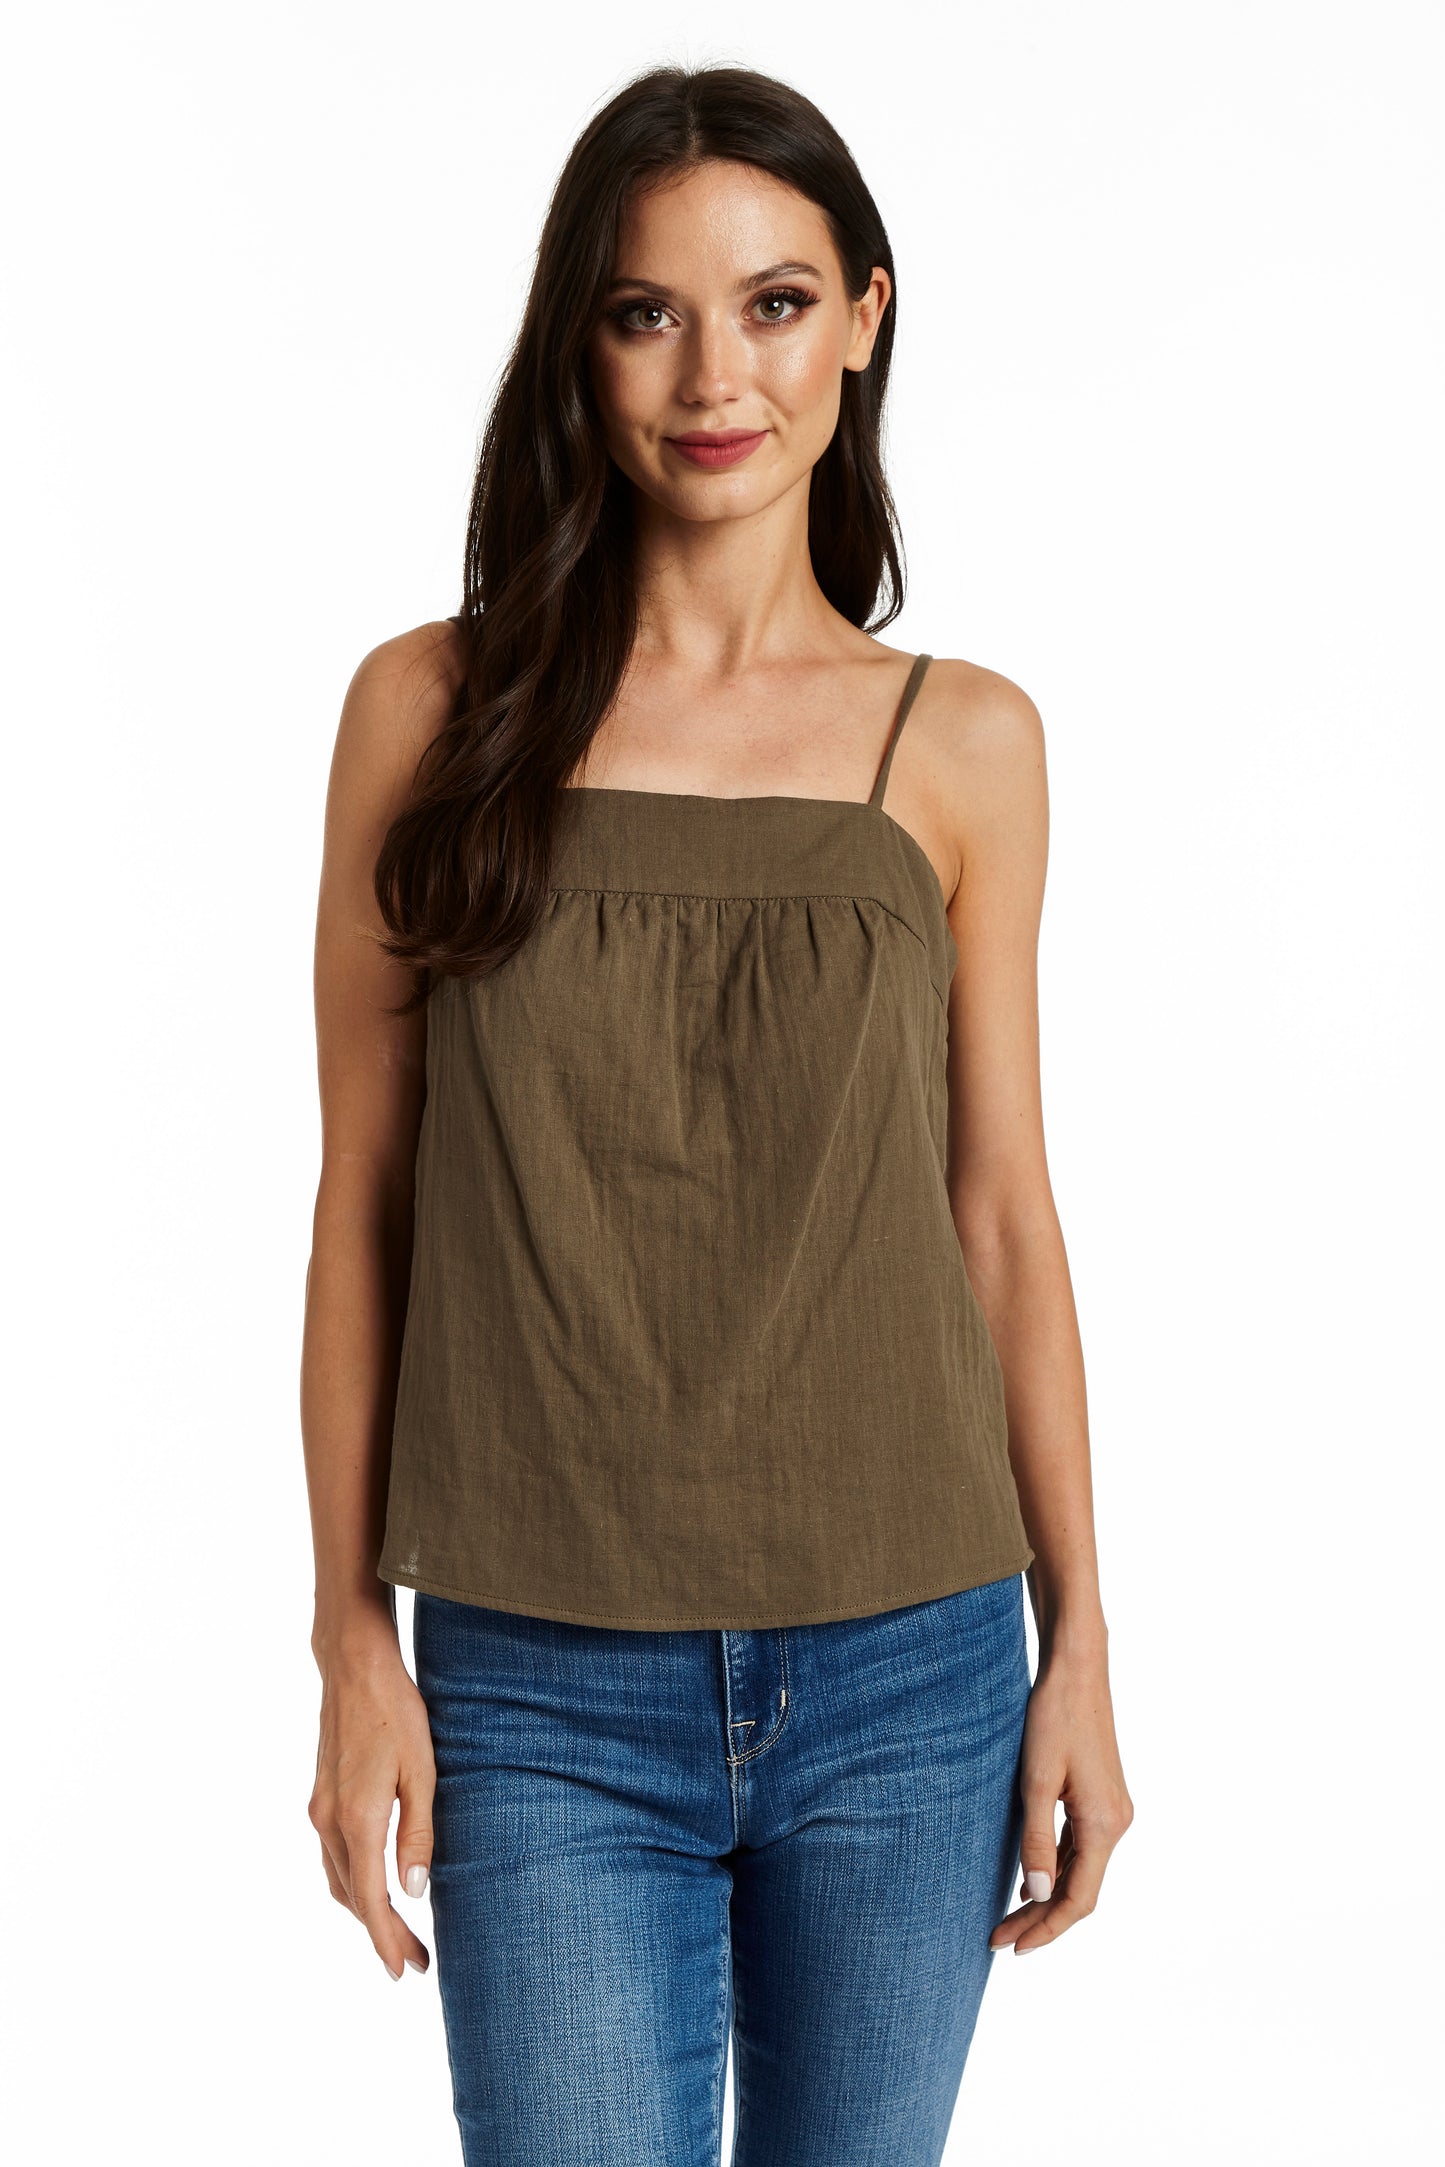 Drew Willow Top in olive, tank top, cute top, women's clothing